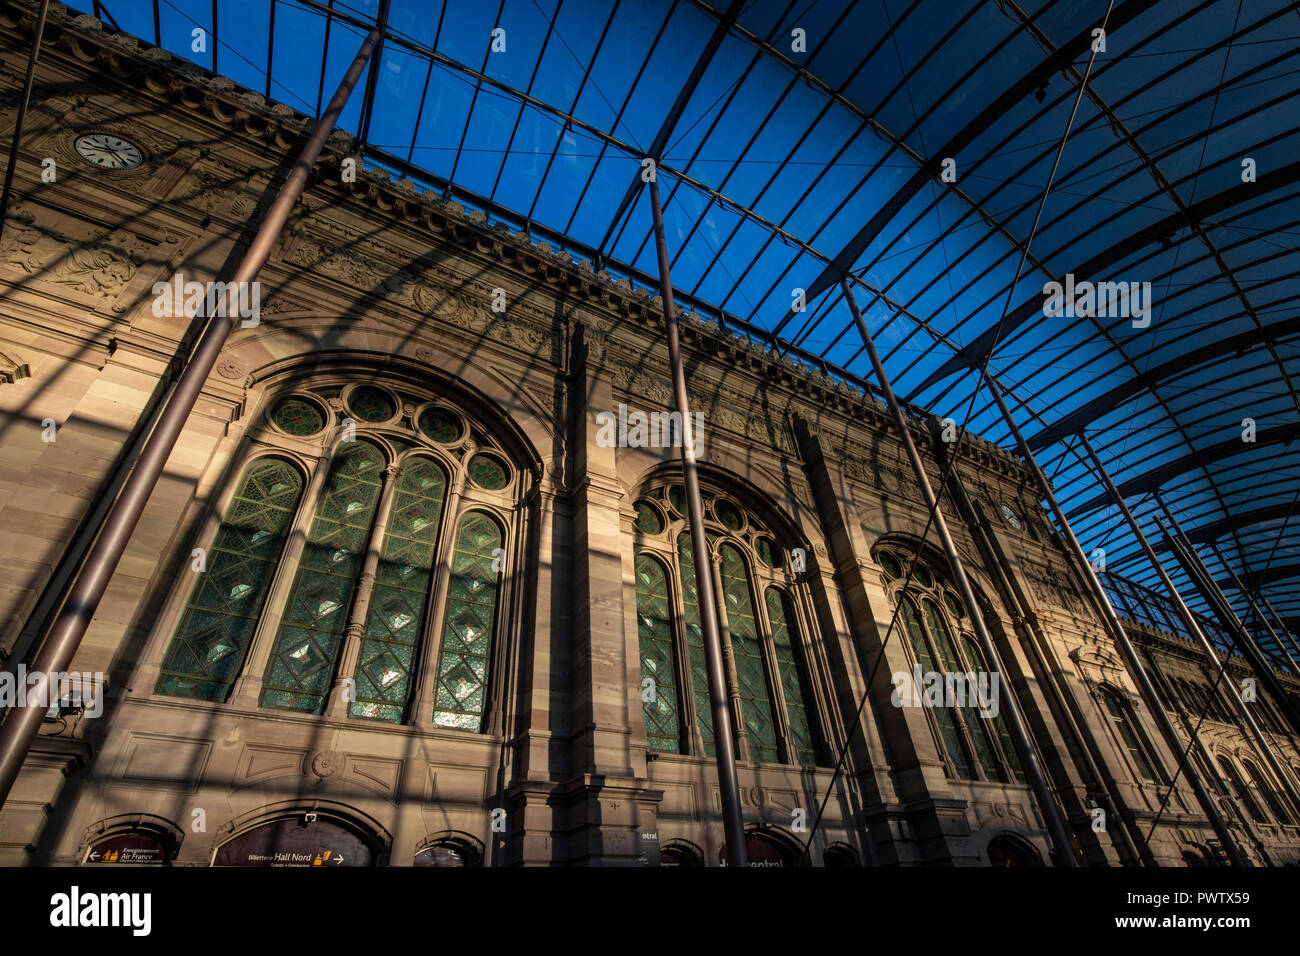 Strasbourg Gare Centrale is the main railway station serving Strasbourg, France. Strasbourg Station serves as the station for TGV from major French ci Stock Photo